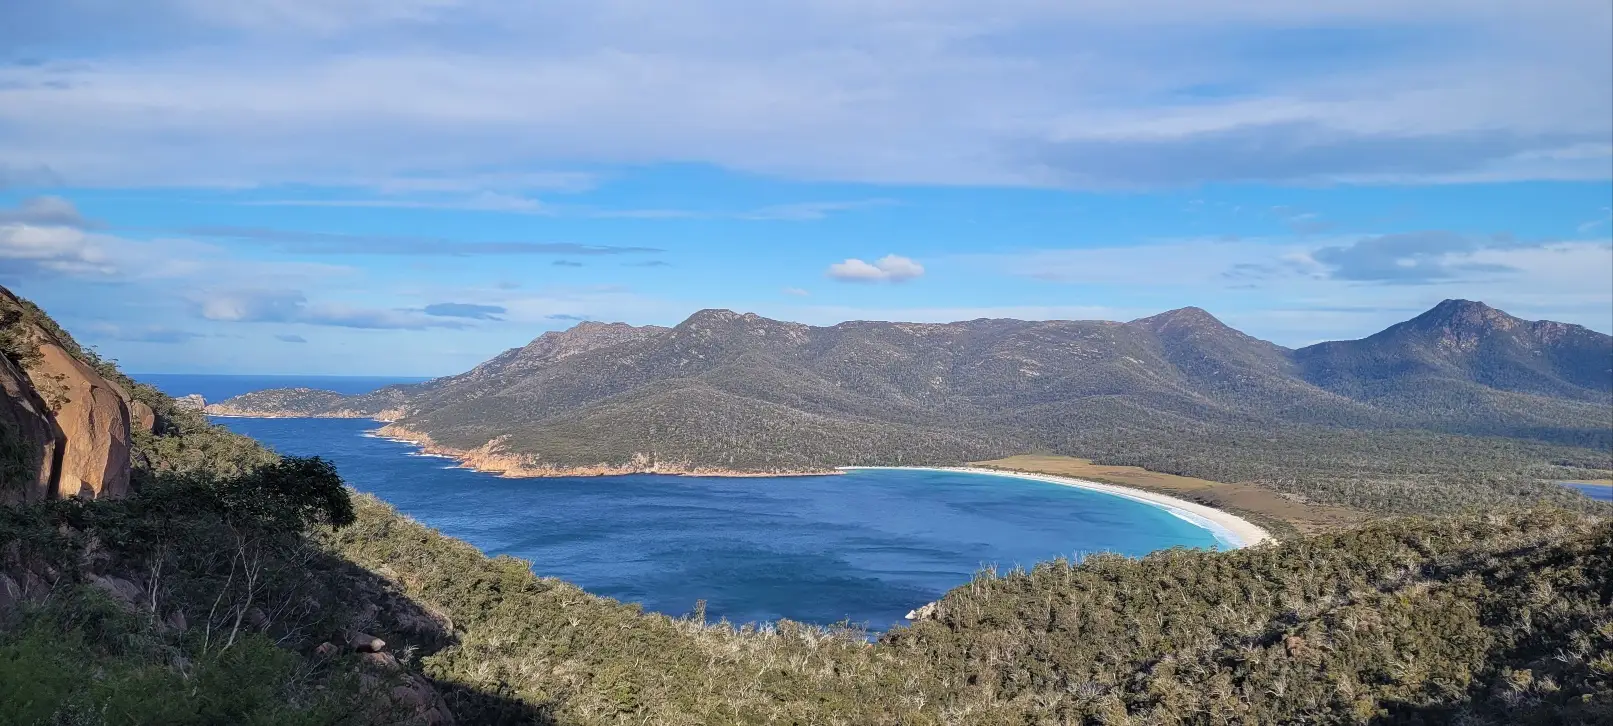 Wide open sea and mountains seen from Mount Tasmania